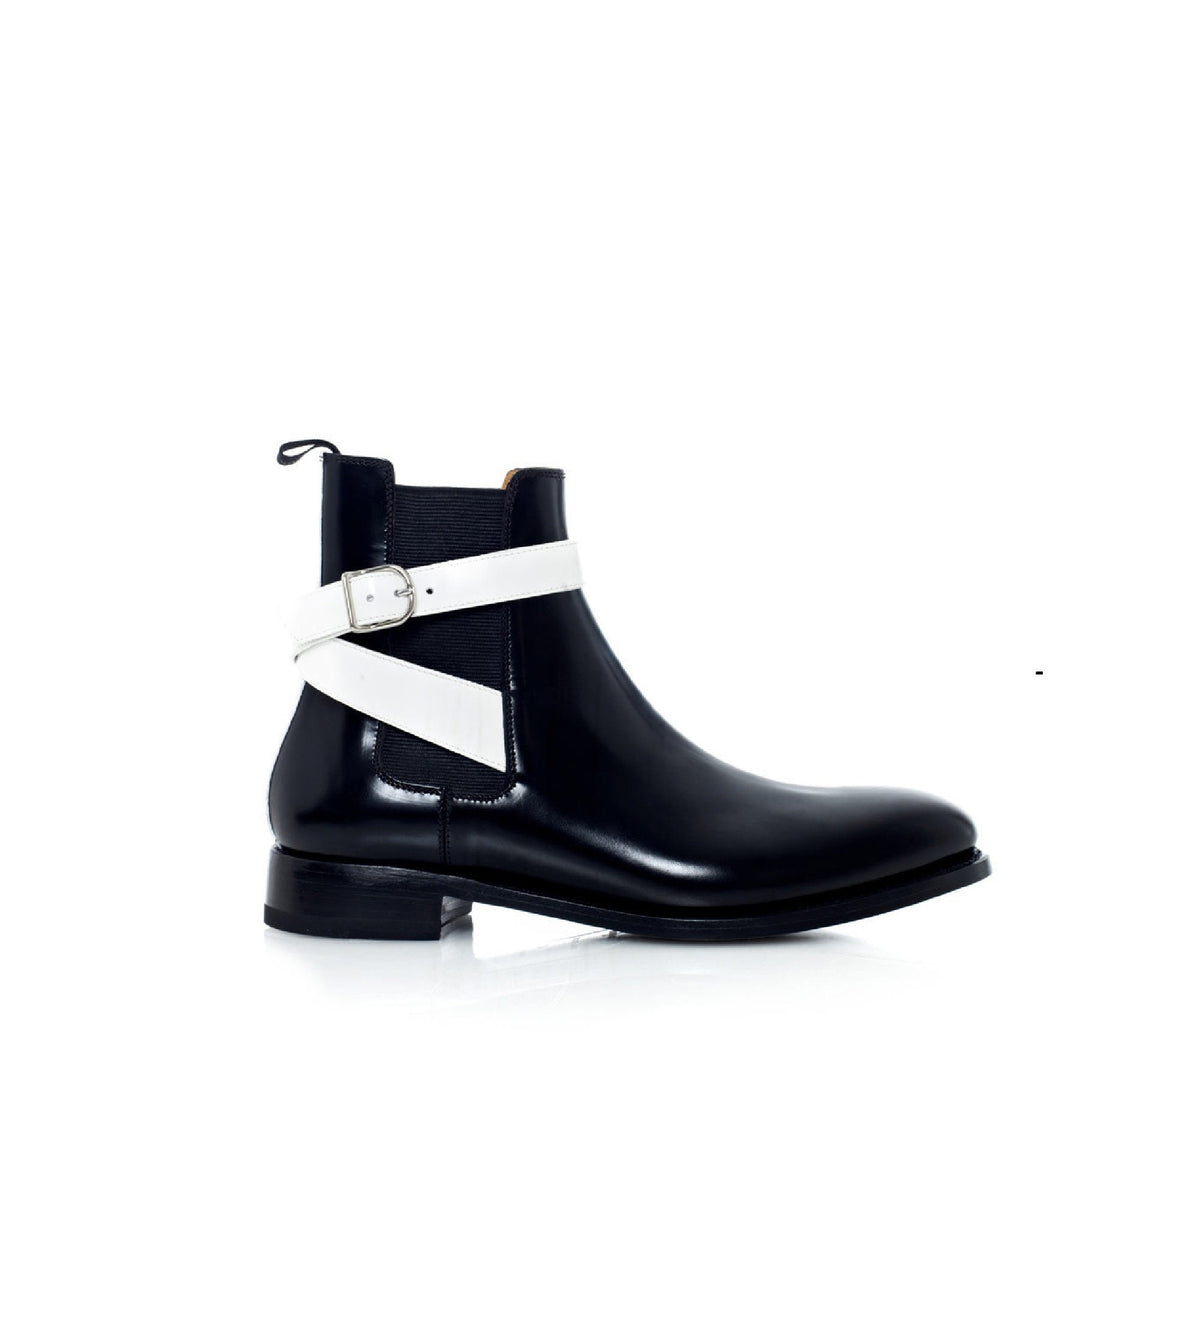 Men's Handmade Ankle High Chelsea boots black leather White Strap boots, Dress Buckle Boot Men, Gift for Him